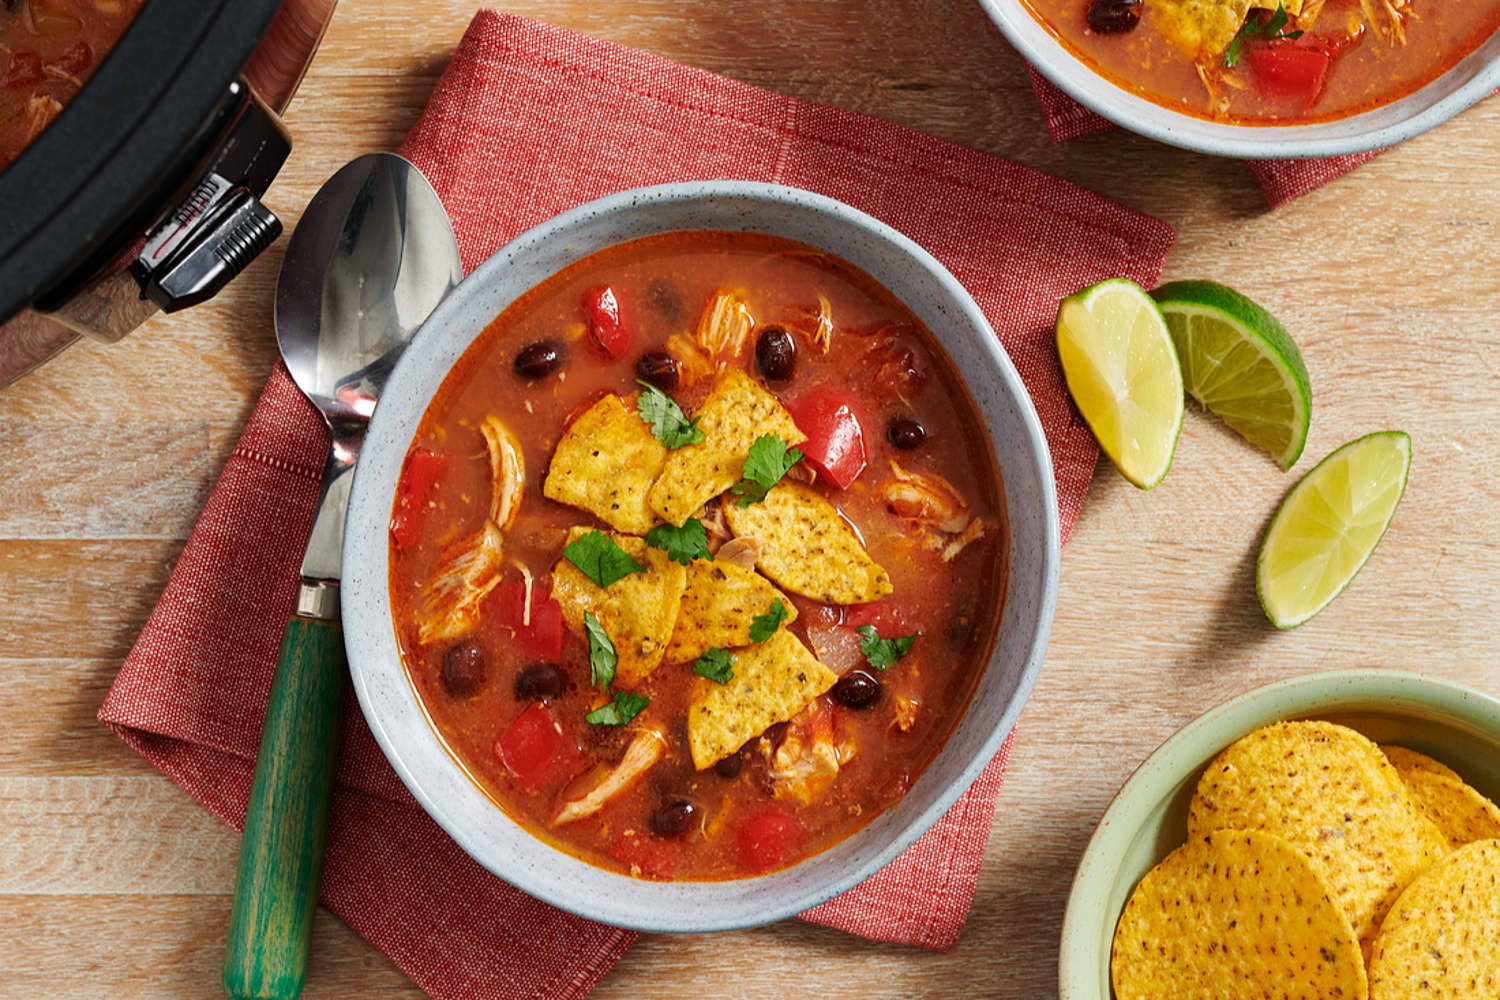 Tomato based soup with visible black beans, chicken, tomatoes and chips as tortilla topping